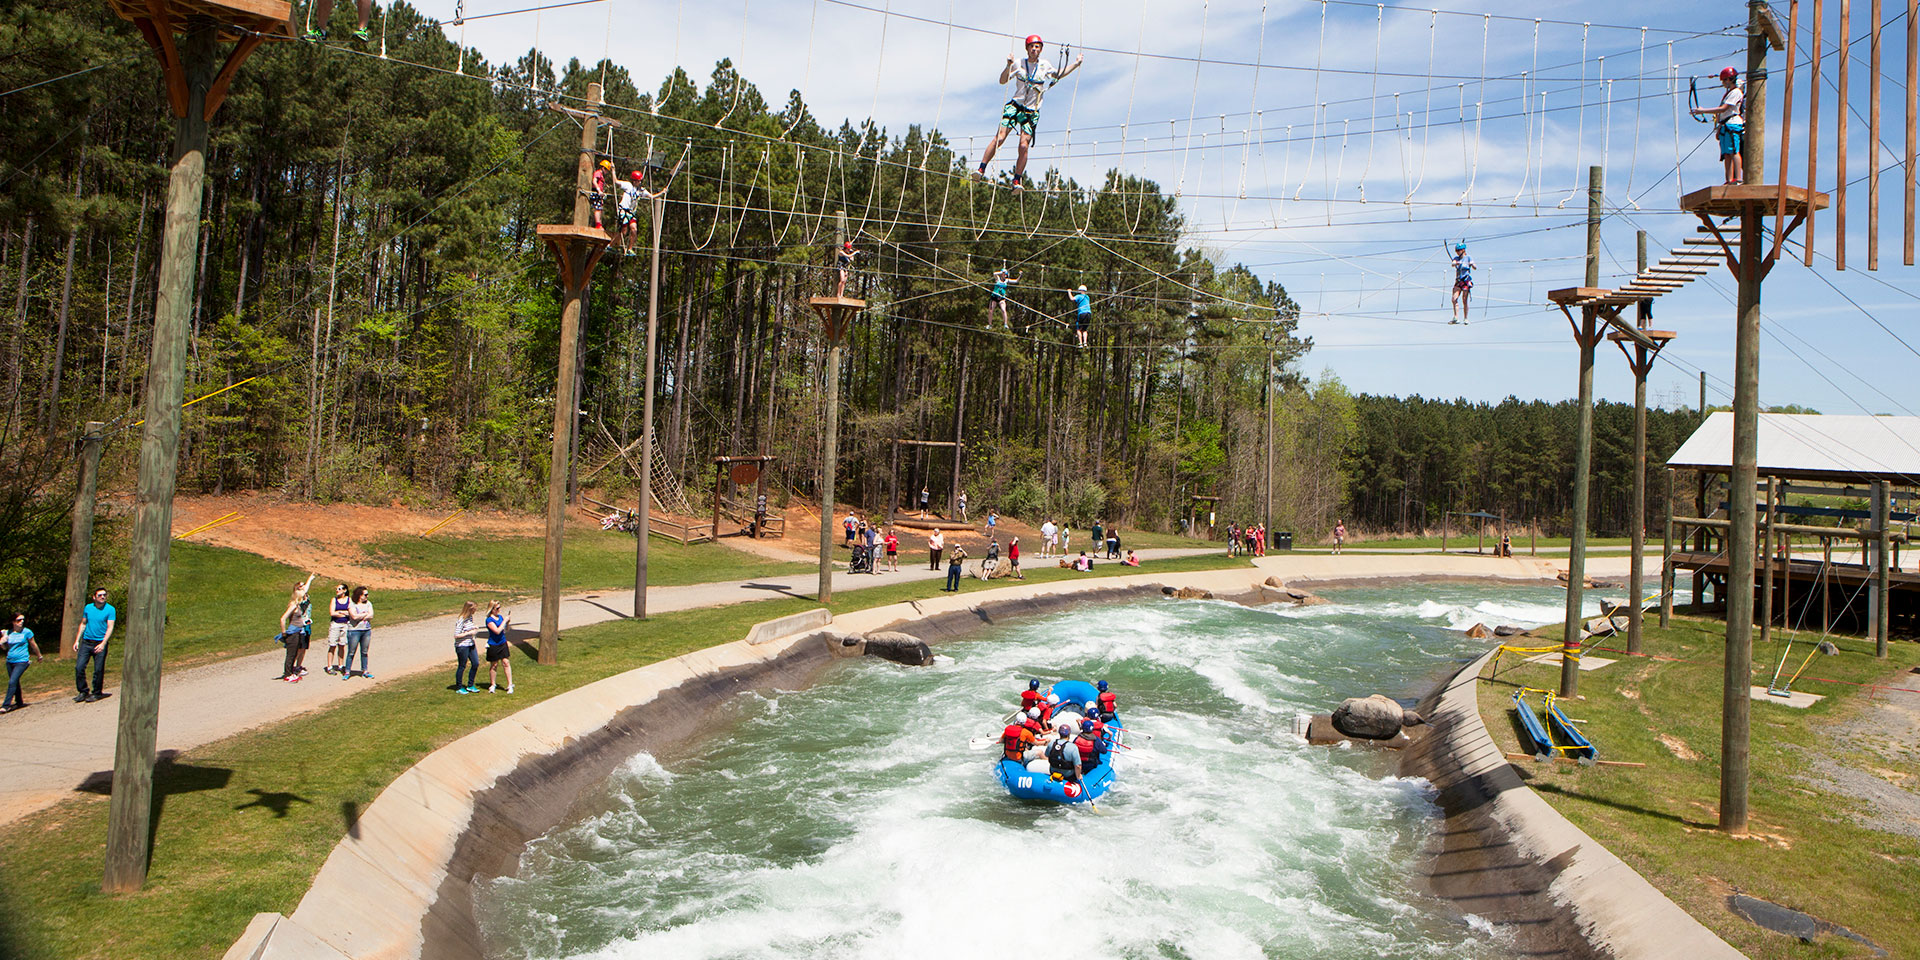 the U.S. National Whitewater Center